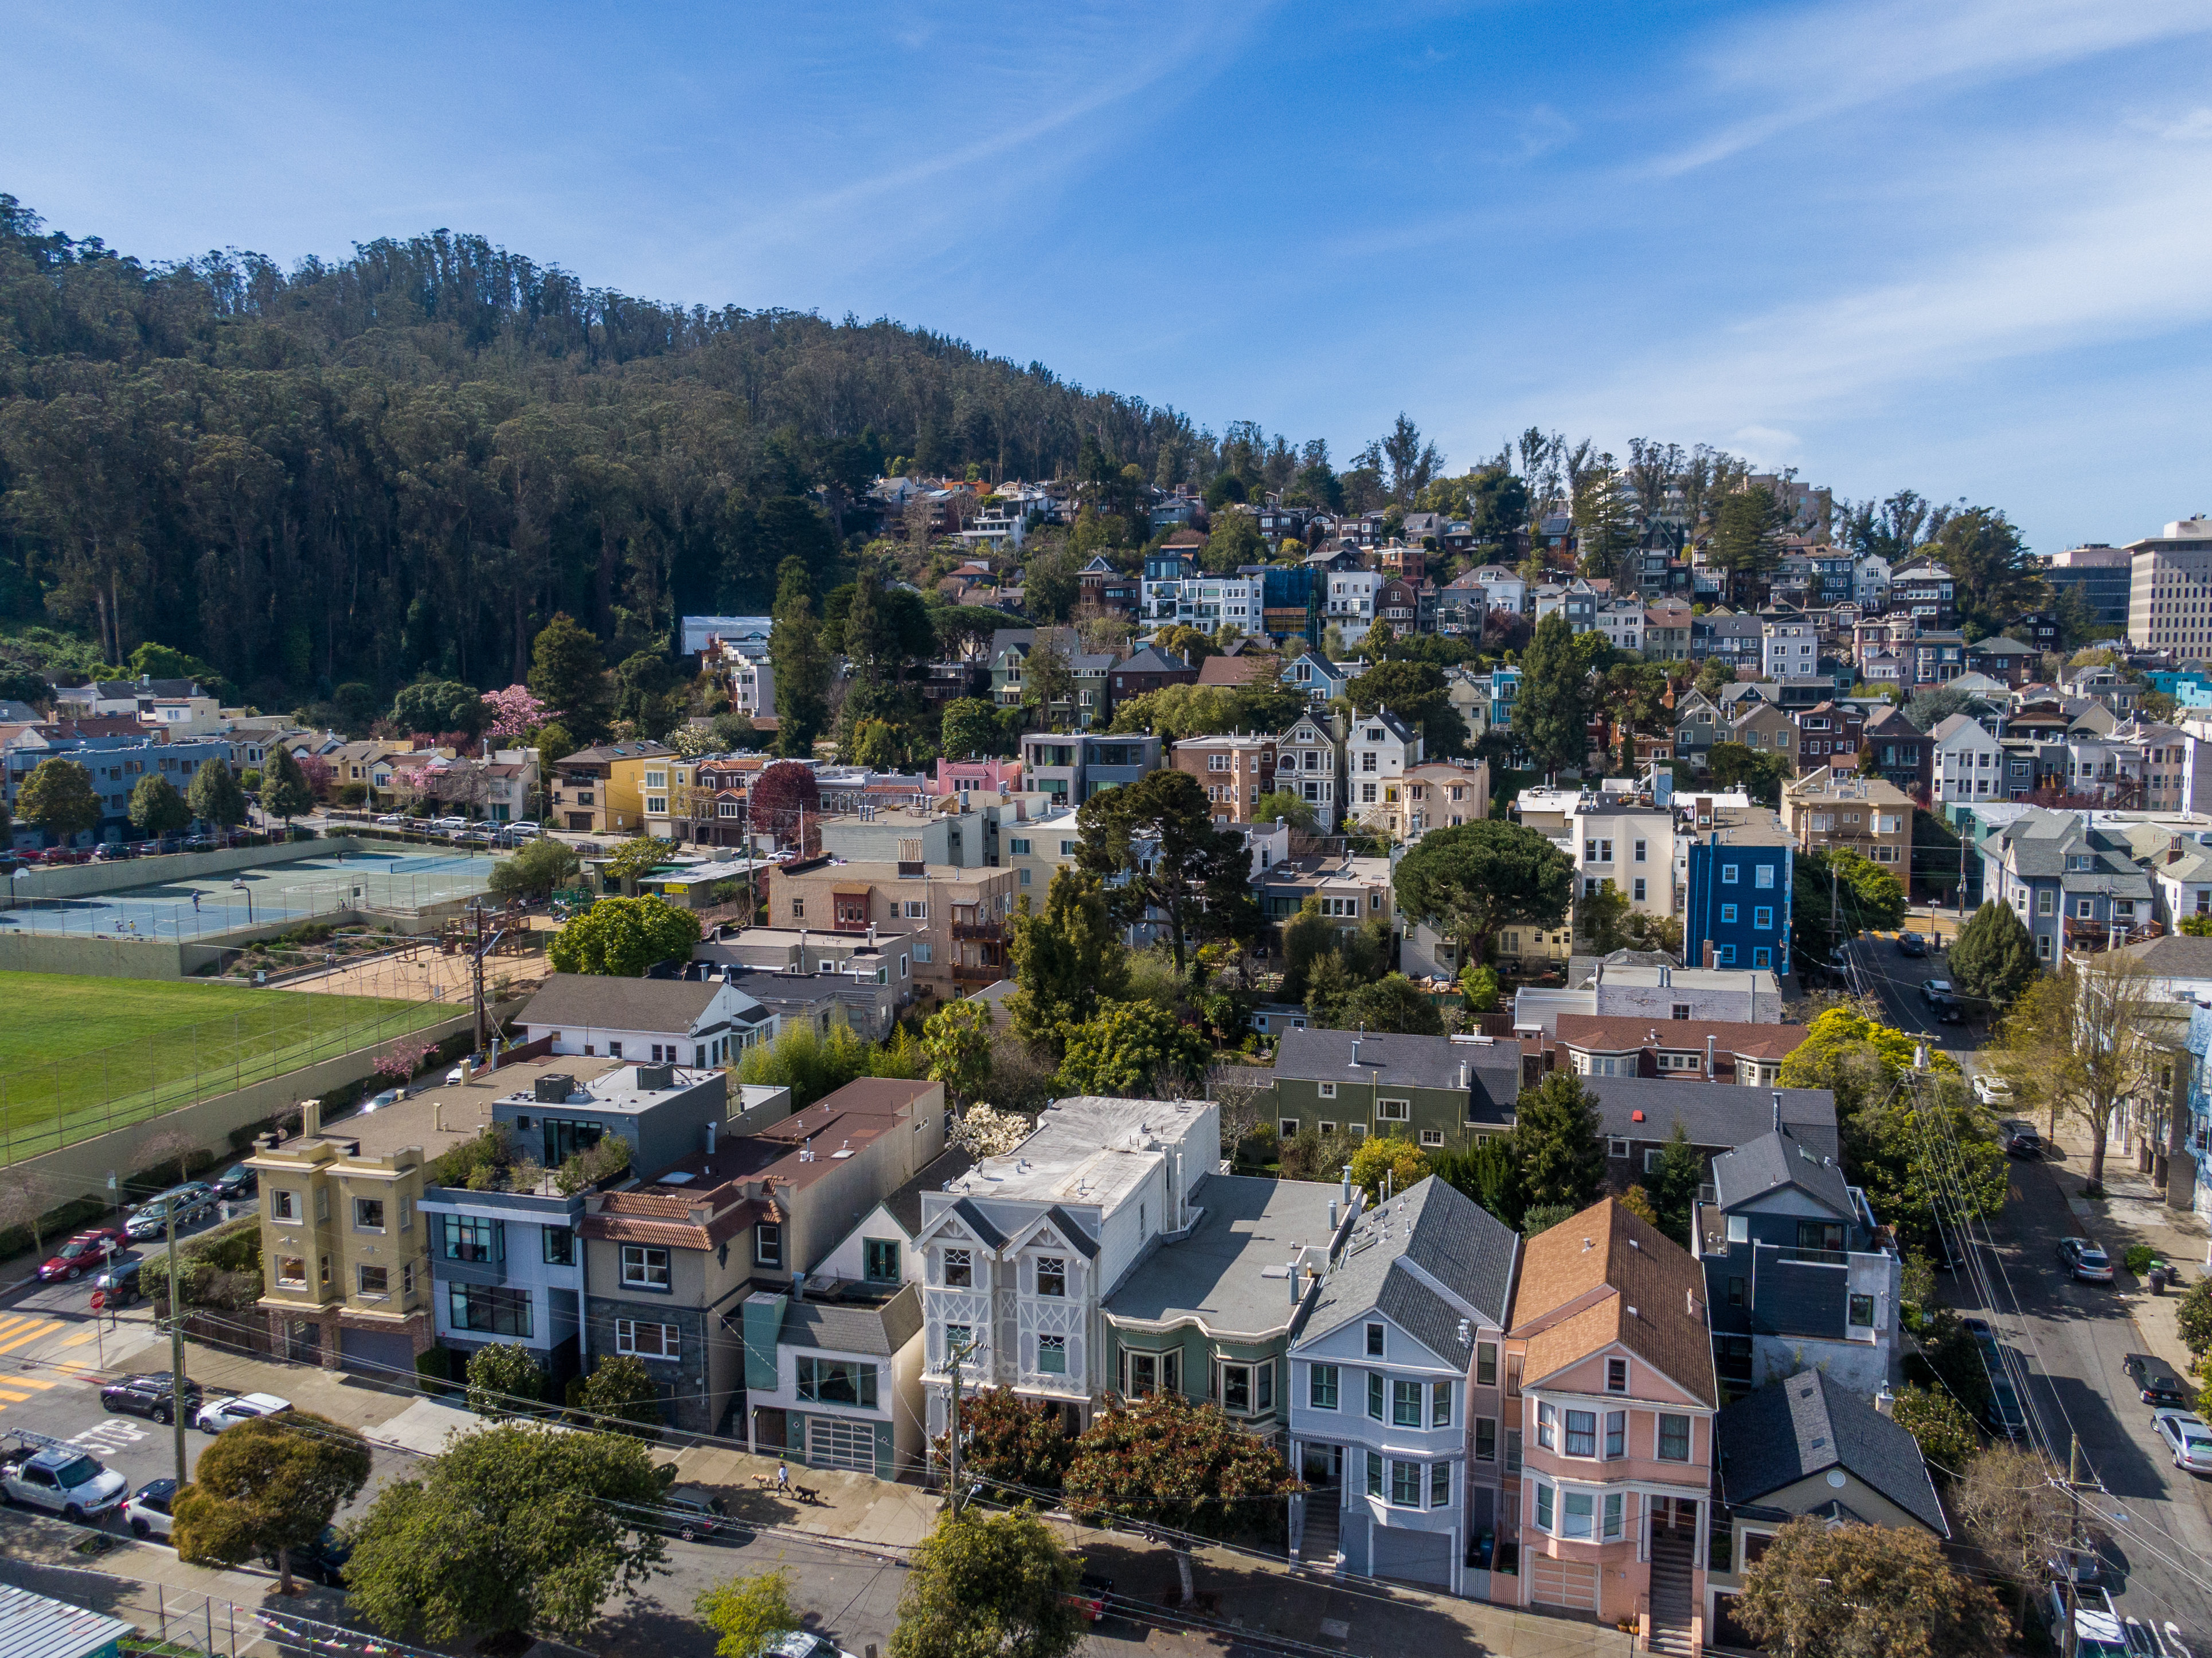 Aerial view of Golden Gate Park and San Francisco Bay showing rows of beautiful homes